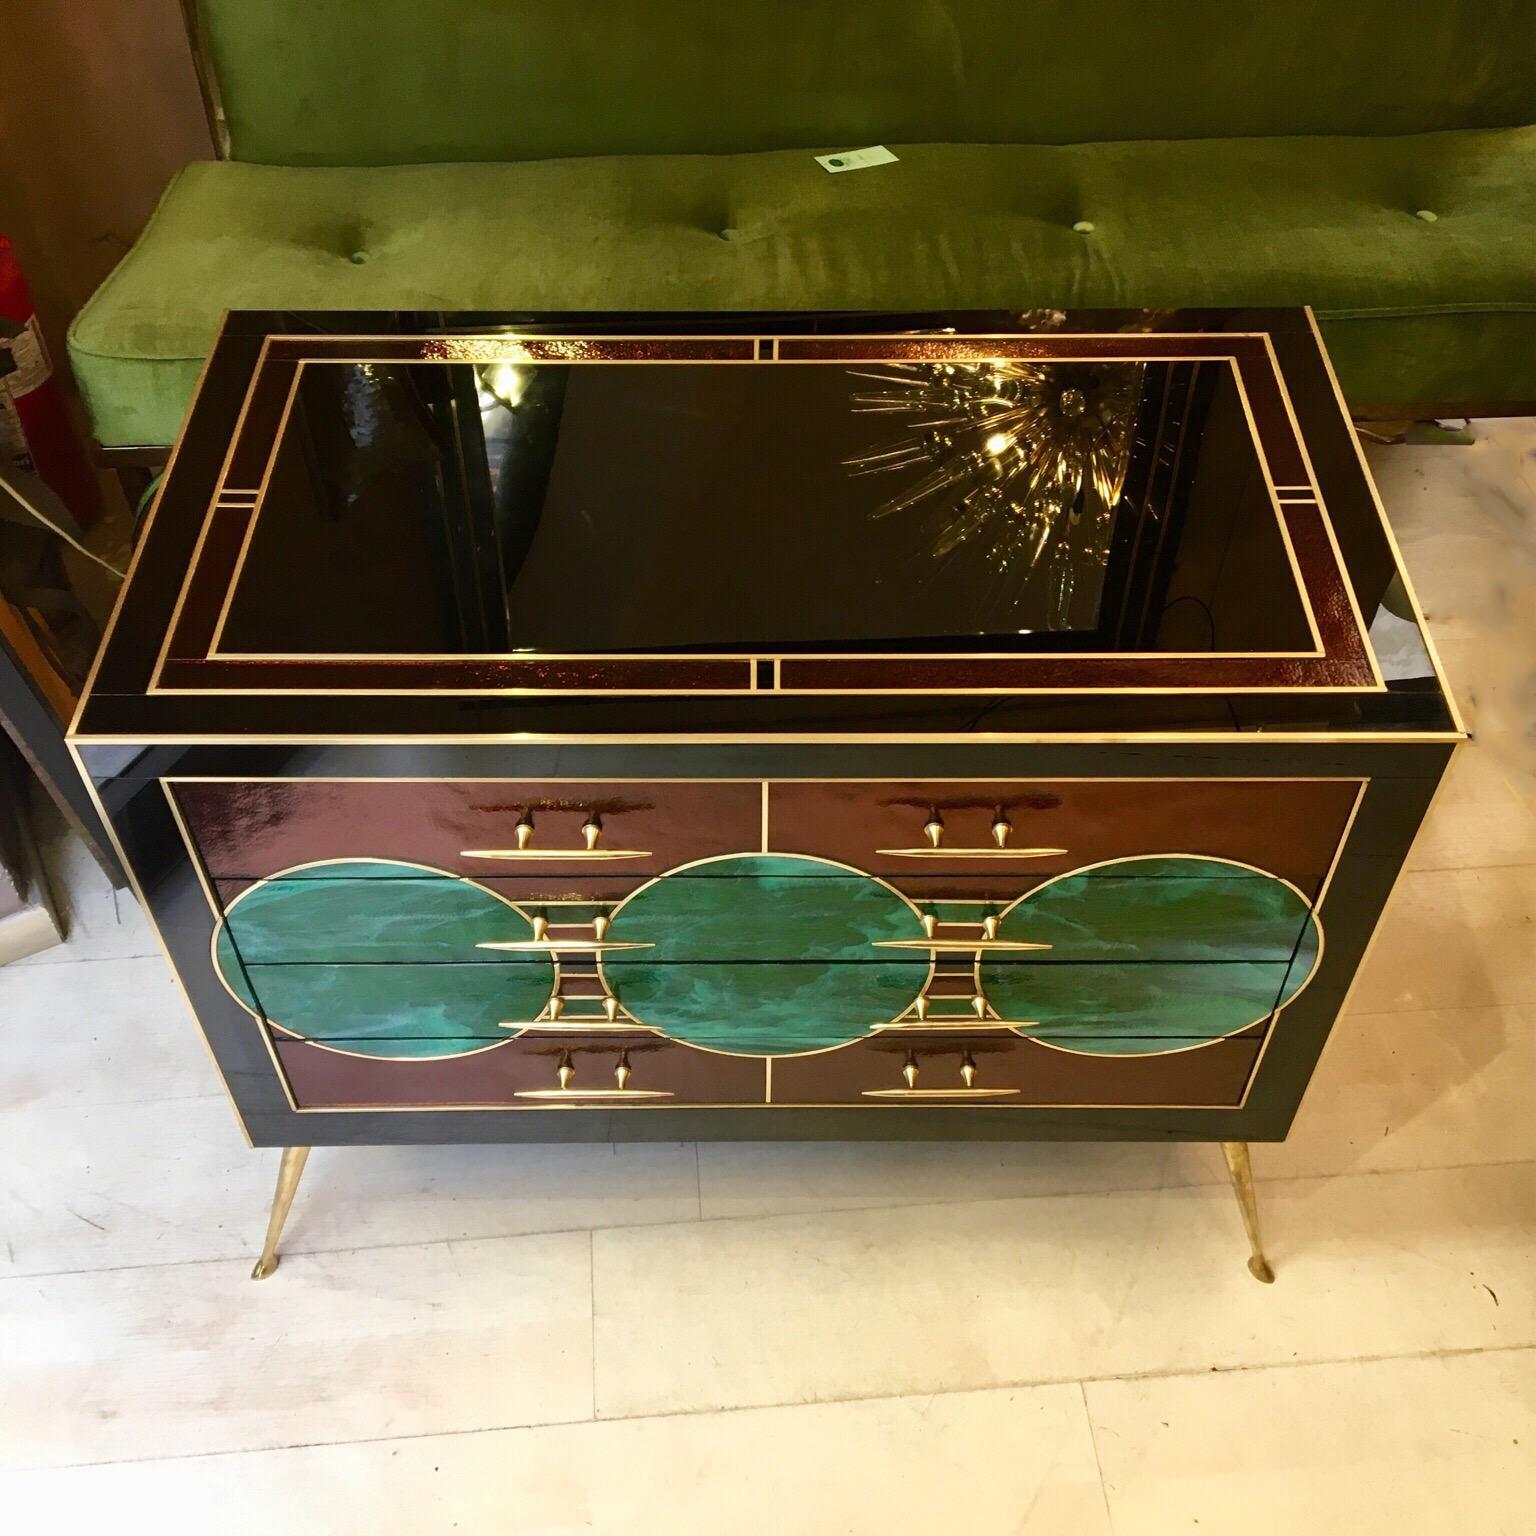 Opaline glass chest of drawers, frontal decoration with green opaline glass circles malachite effect, black and plum color opaline glass top and sides, brass inlays, handles and legs, three drawers.